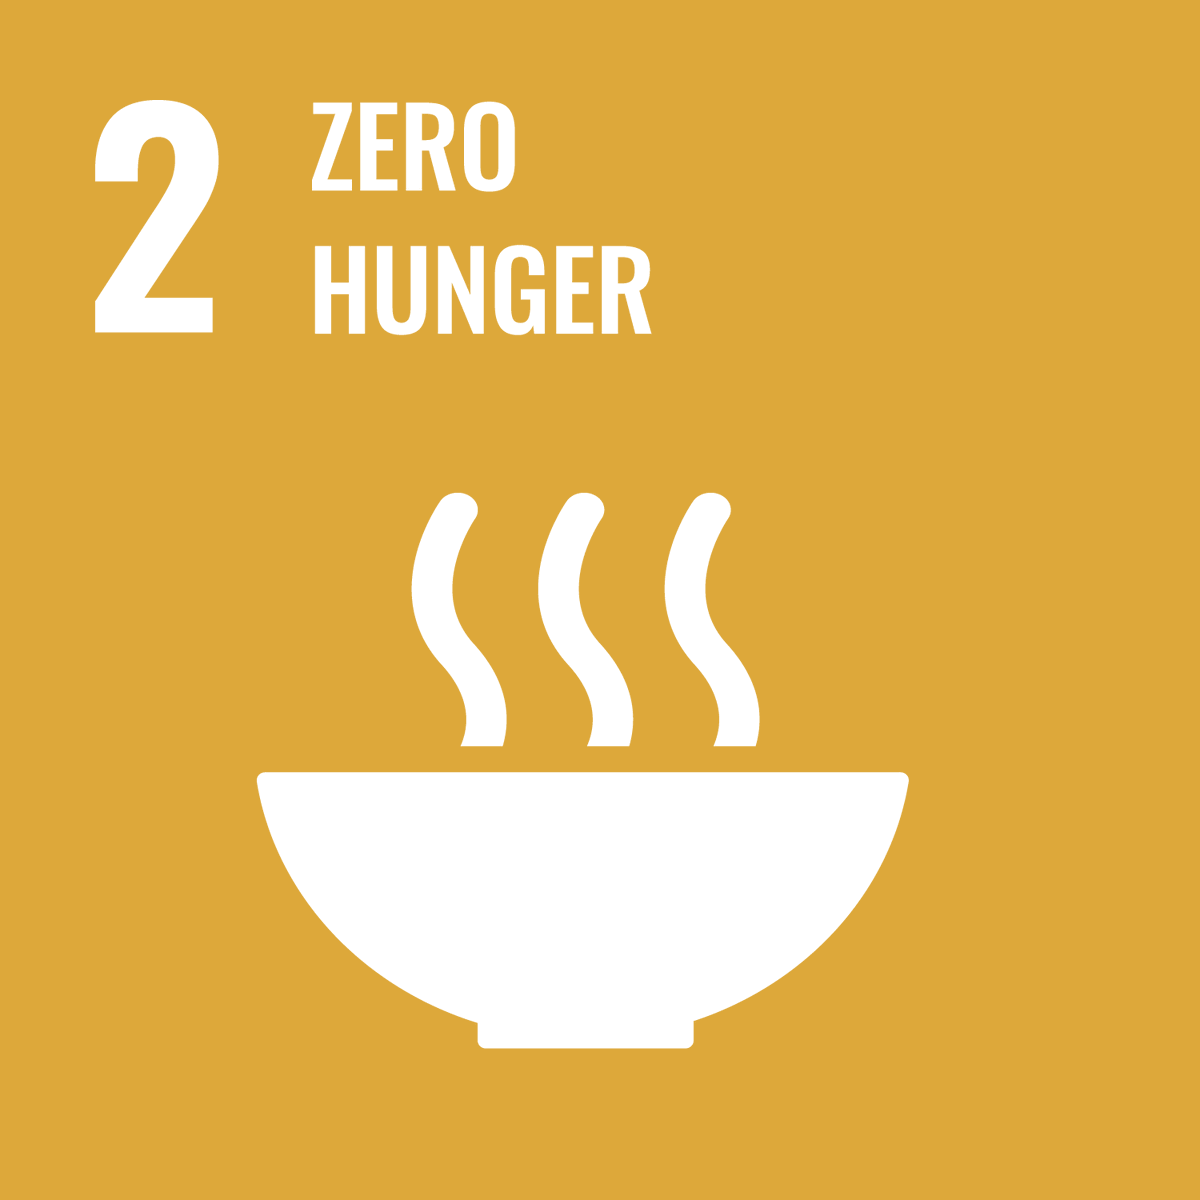 No child and no mother should go hungry. It's time for firm commitments to combat global hunger. #WorldHungerDay hashtag#EndHunger hashtag#EducationForAll hashtag#HealthyKids hashtag#SDG